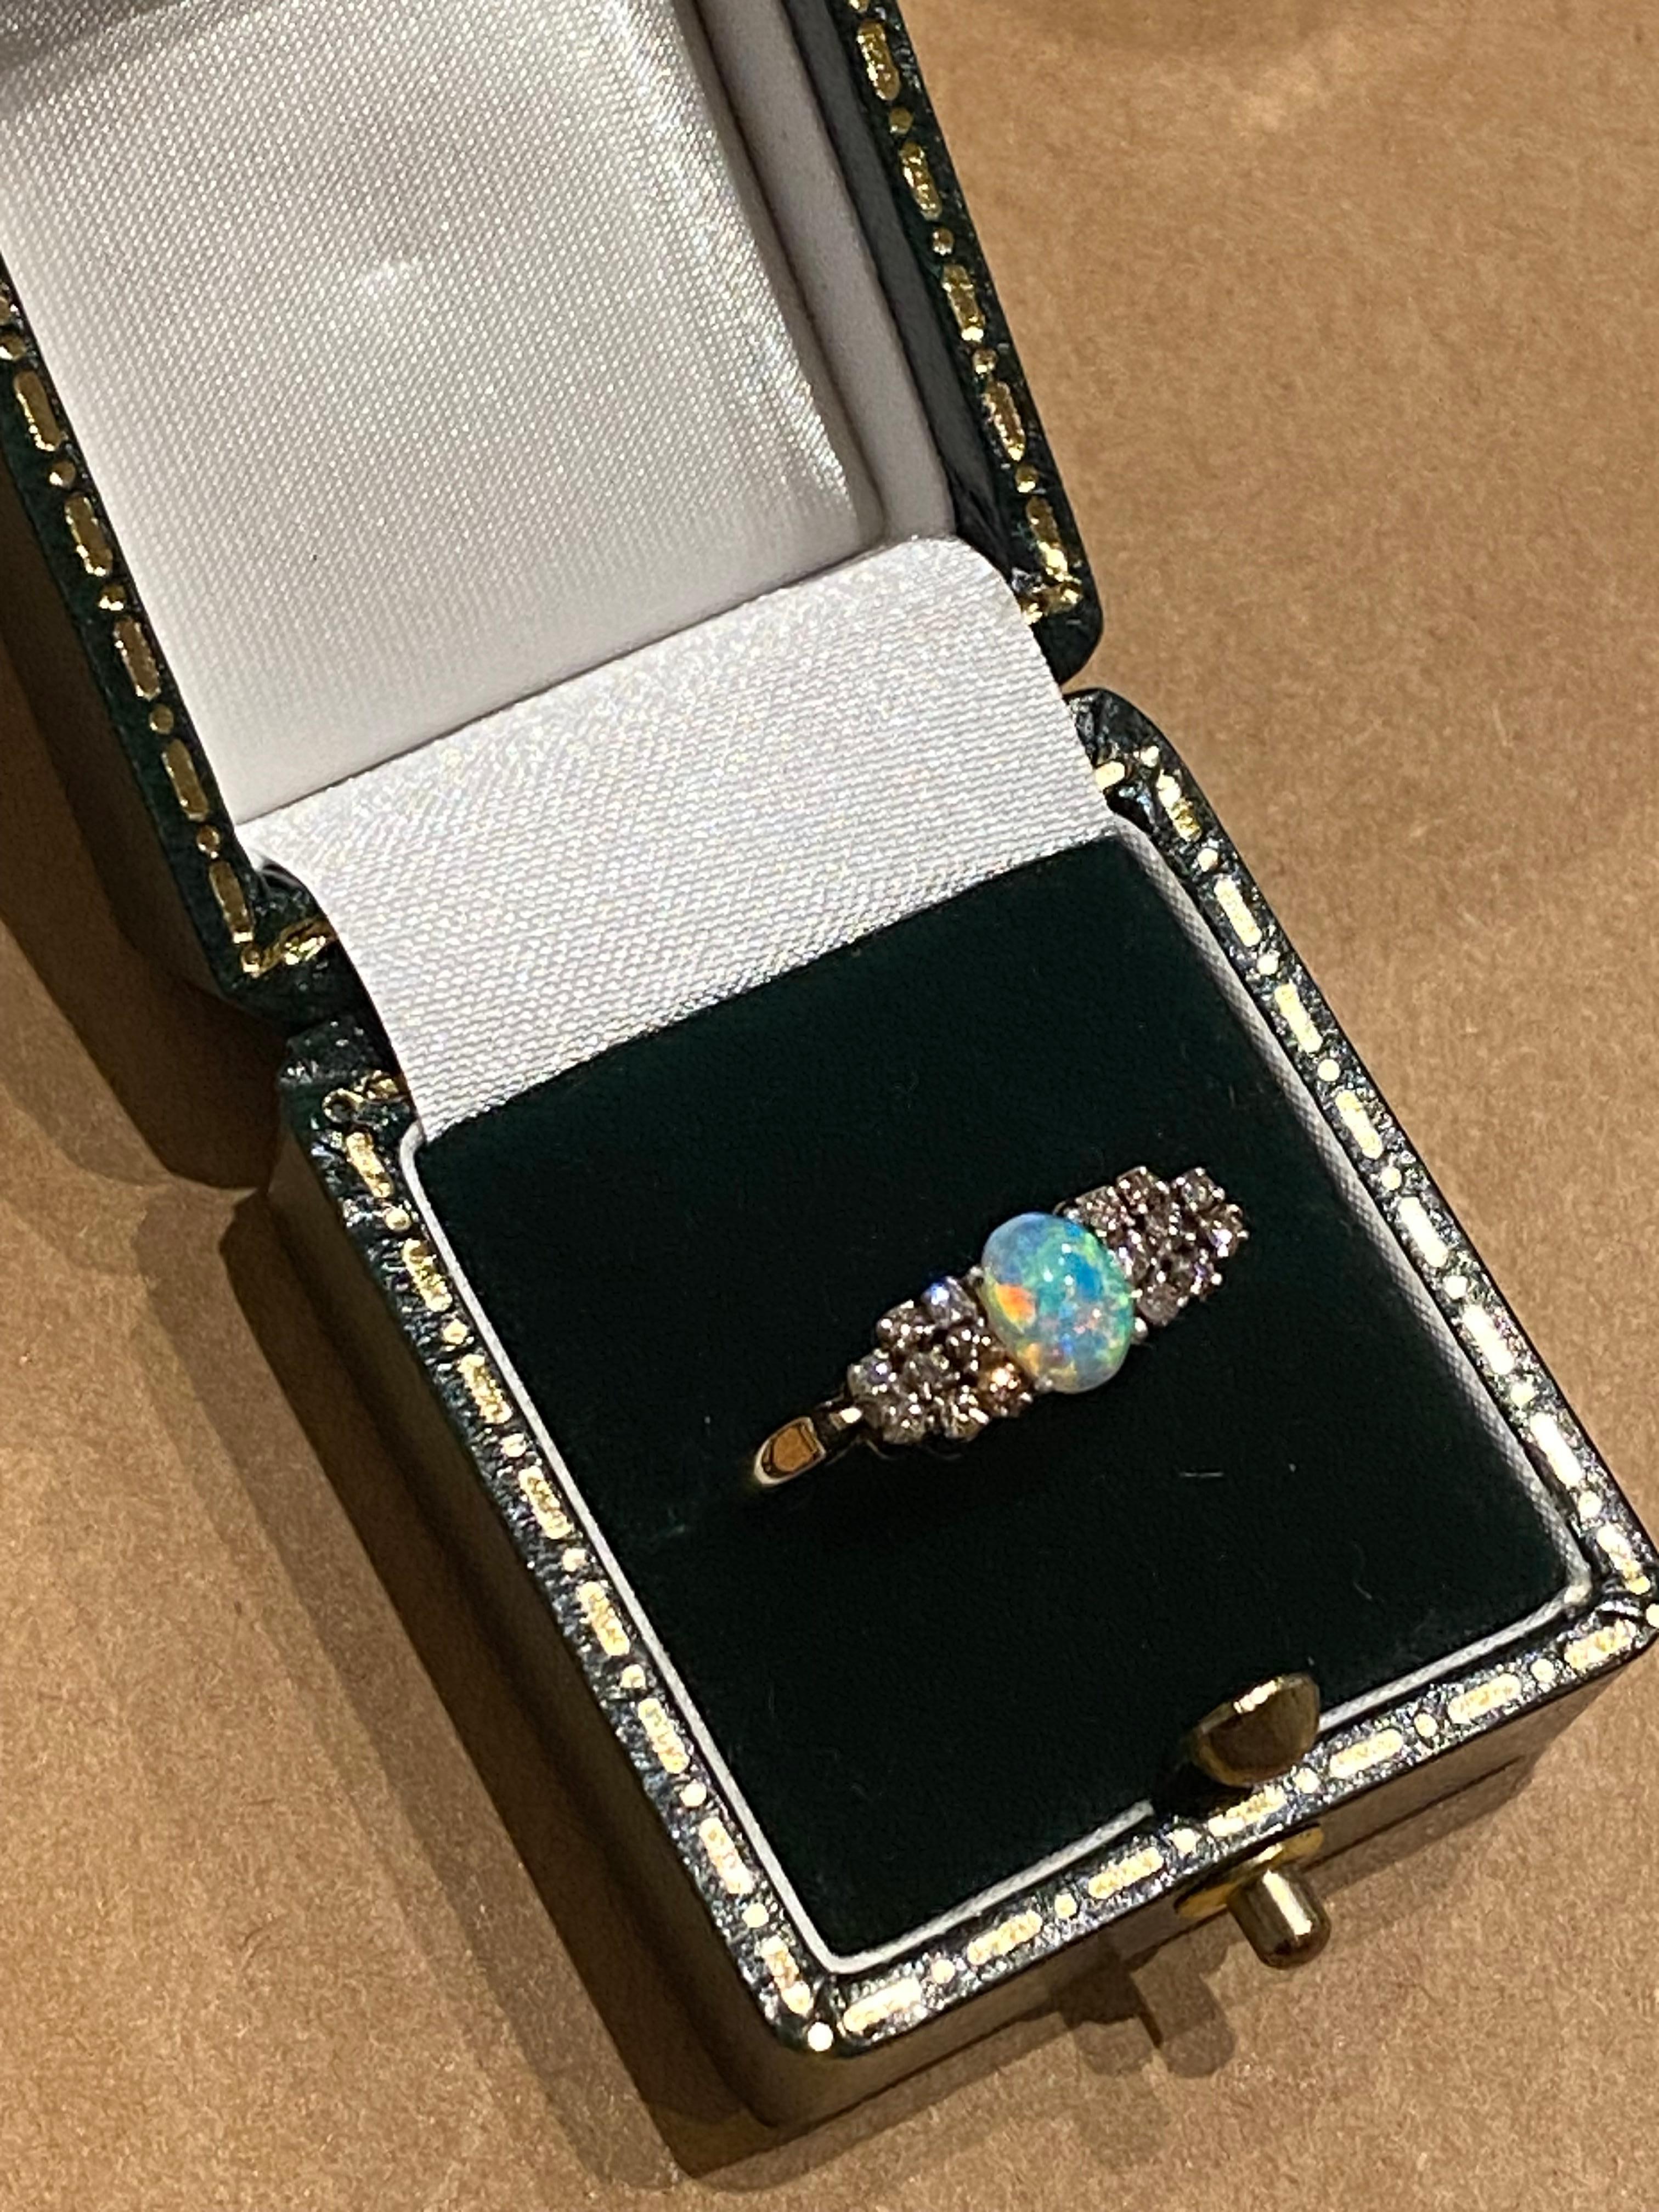 Oval Cut 0.65ct Solid Australian Crystal Opal & 0.50ct Round Diamond Ring in 9K Gold. For Sale